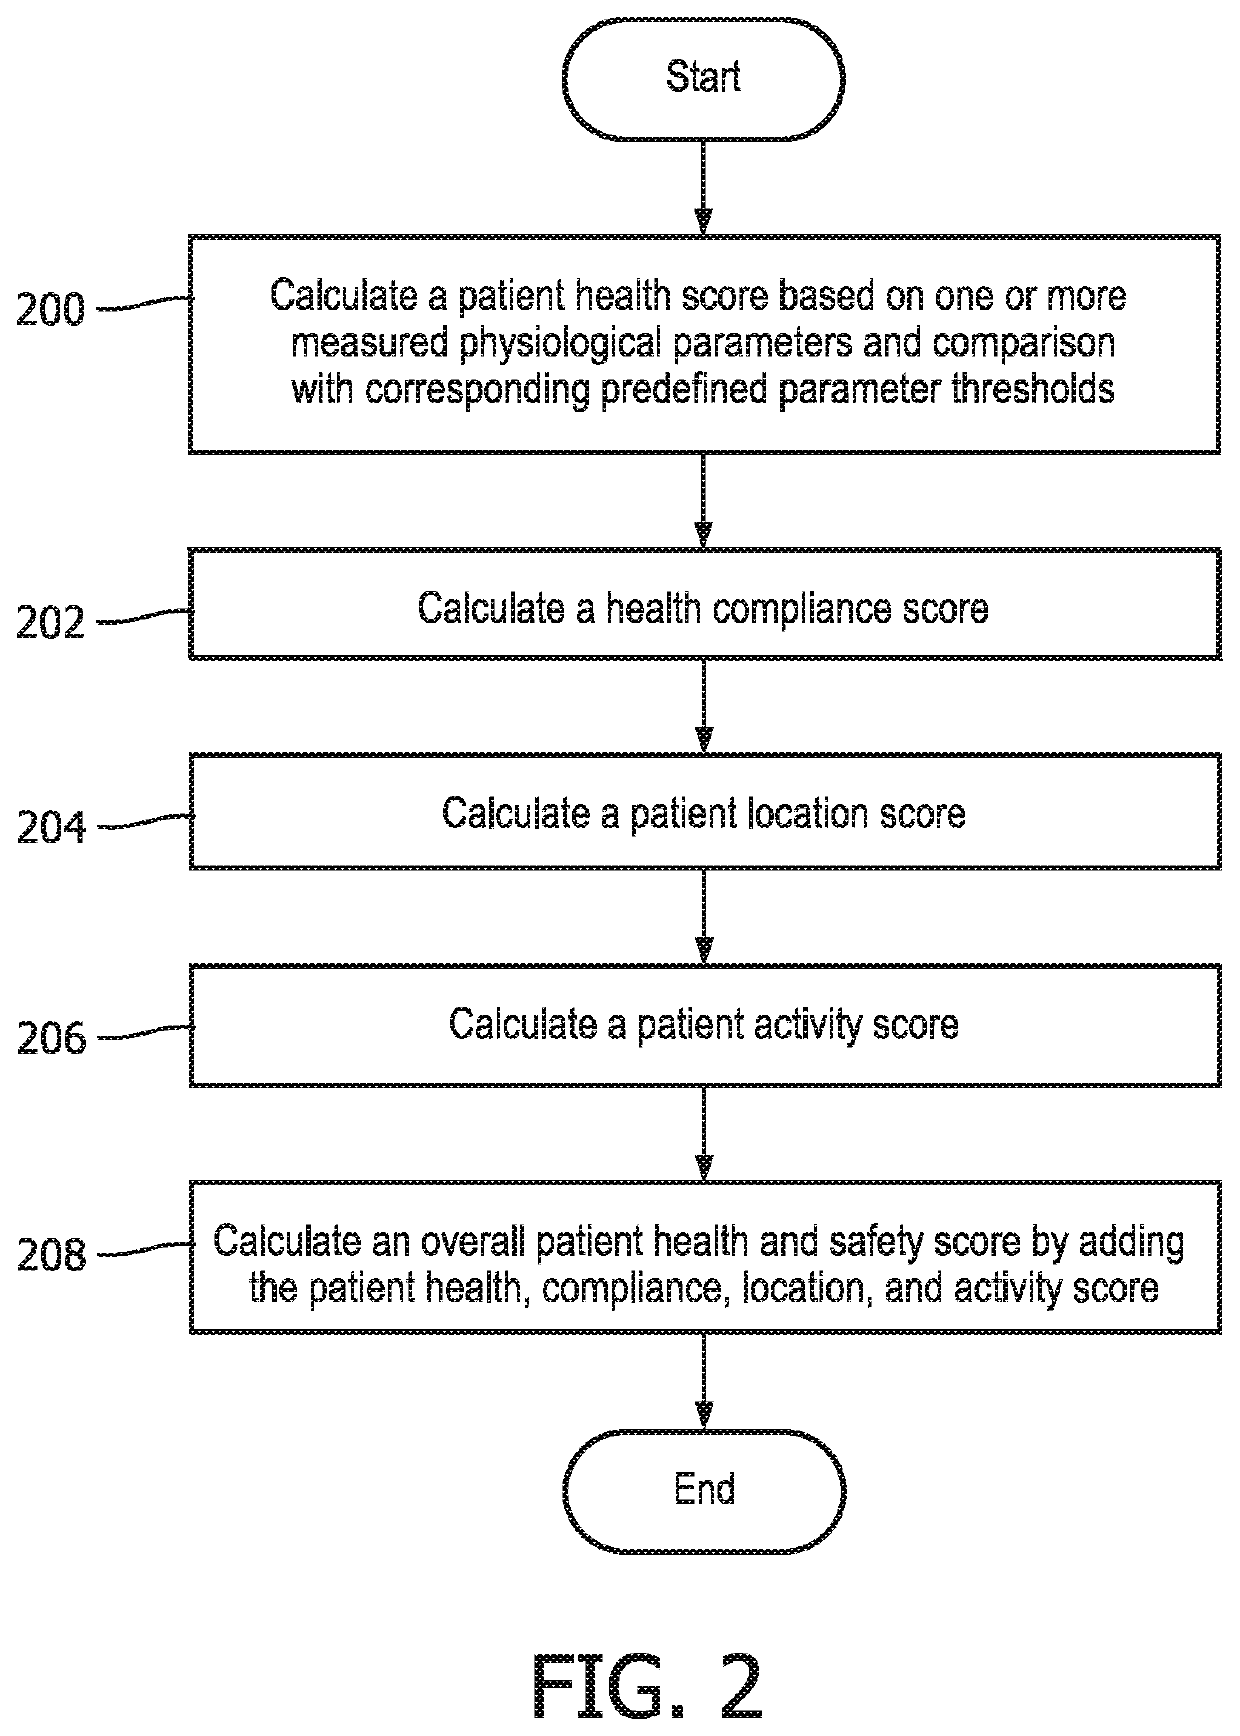 Location, activity, and health compliance monitoring using multidimensional context analysis